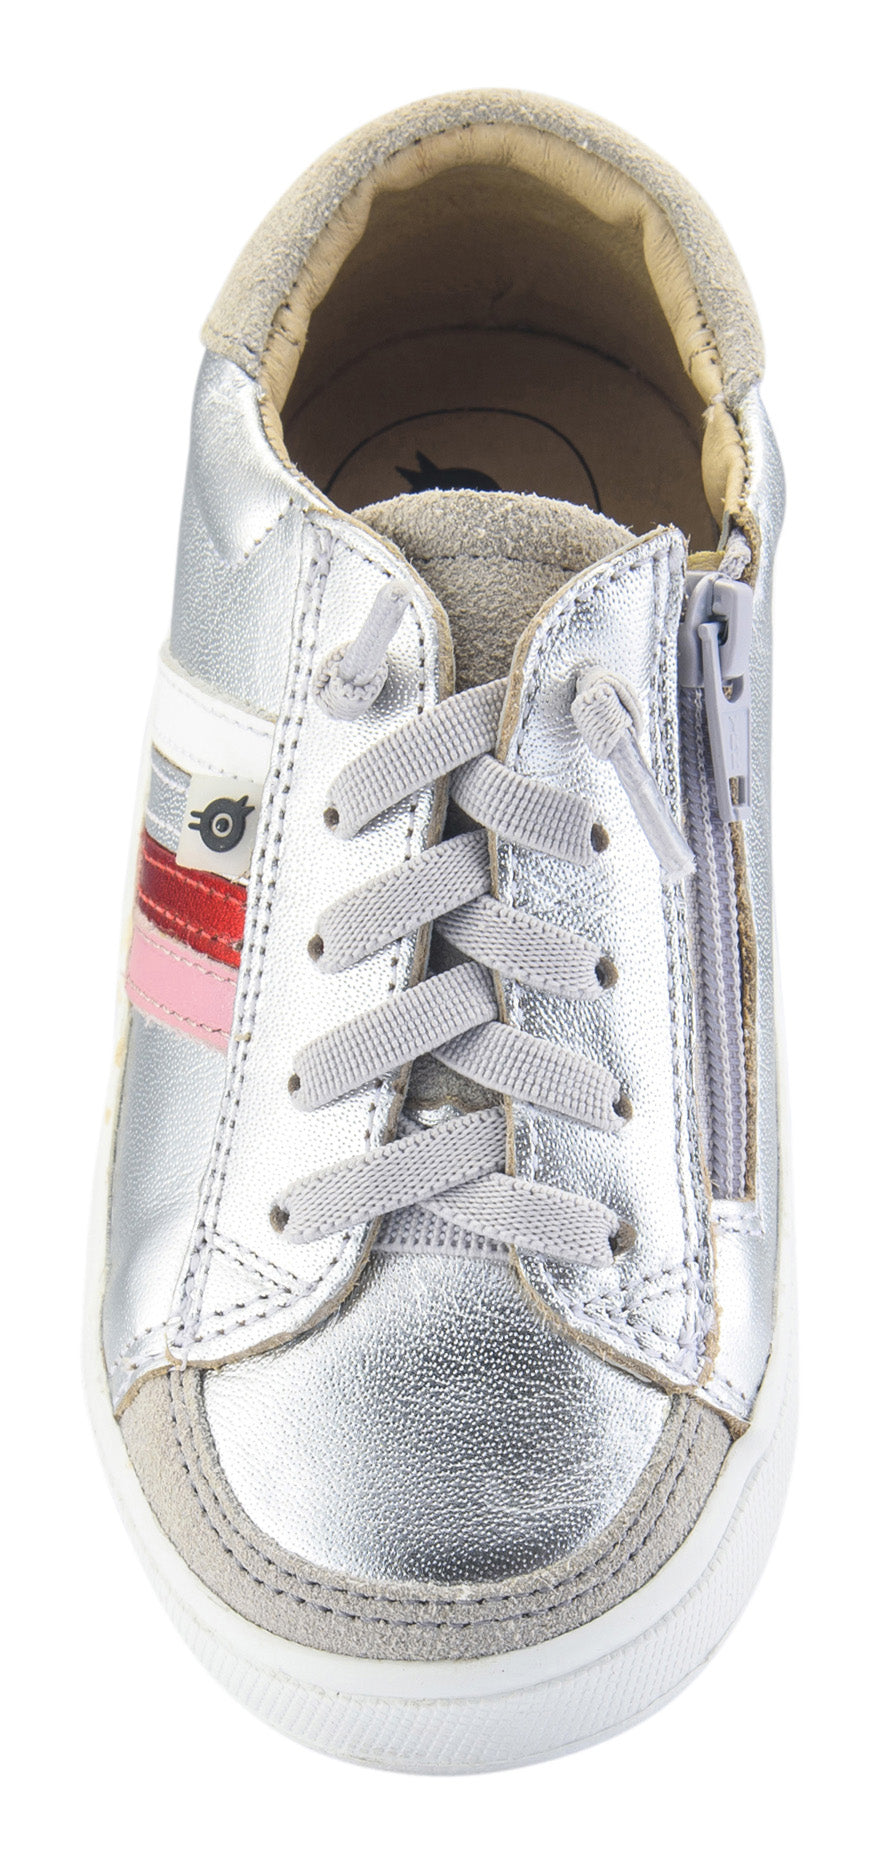 Old Soles Girl's Sneaky RB Leather Sneakers, Silver/Pearlised Pink